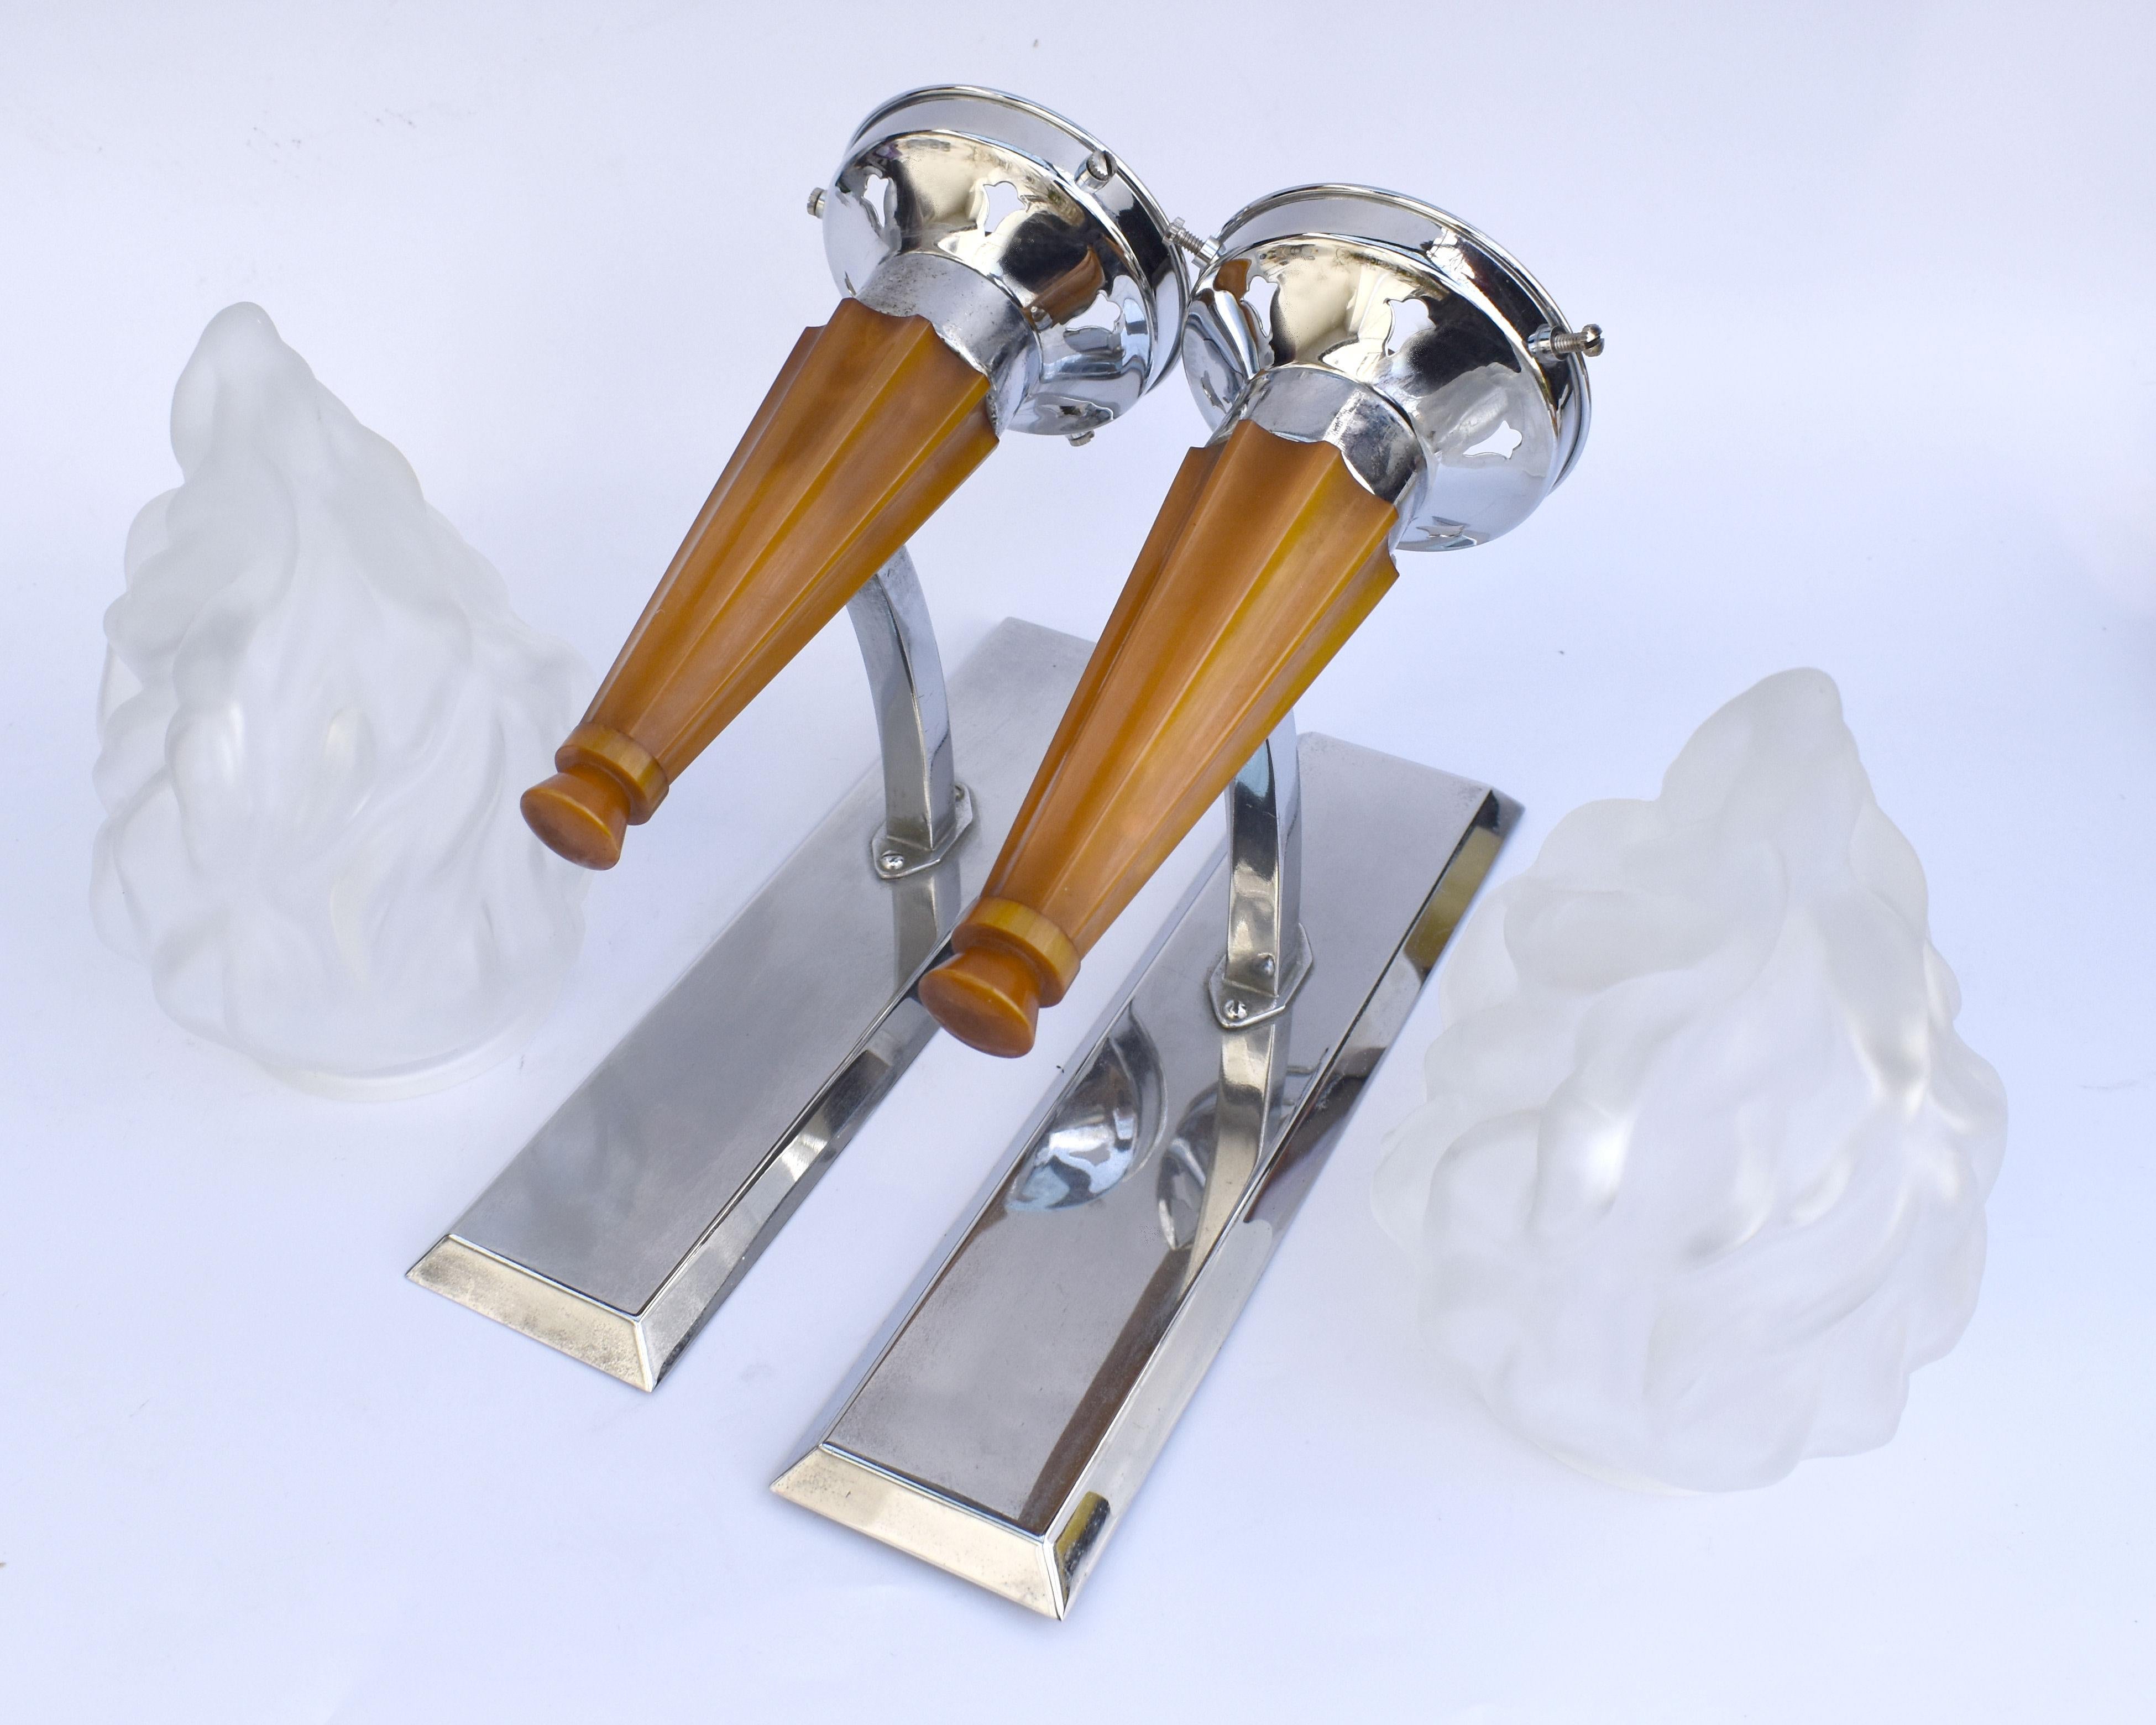 Art Deco Pair of Matching Flame Wall Light Sconces, Circa 1930's In Good Condition For Sale In Devon, England